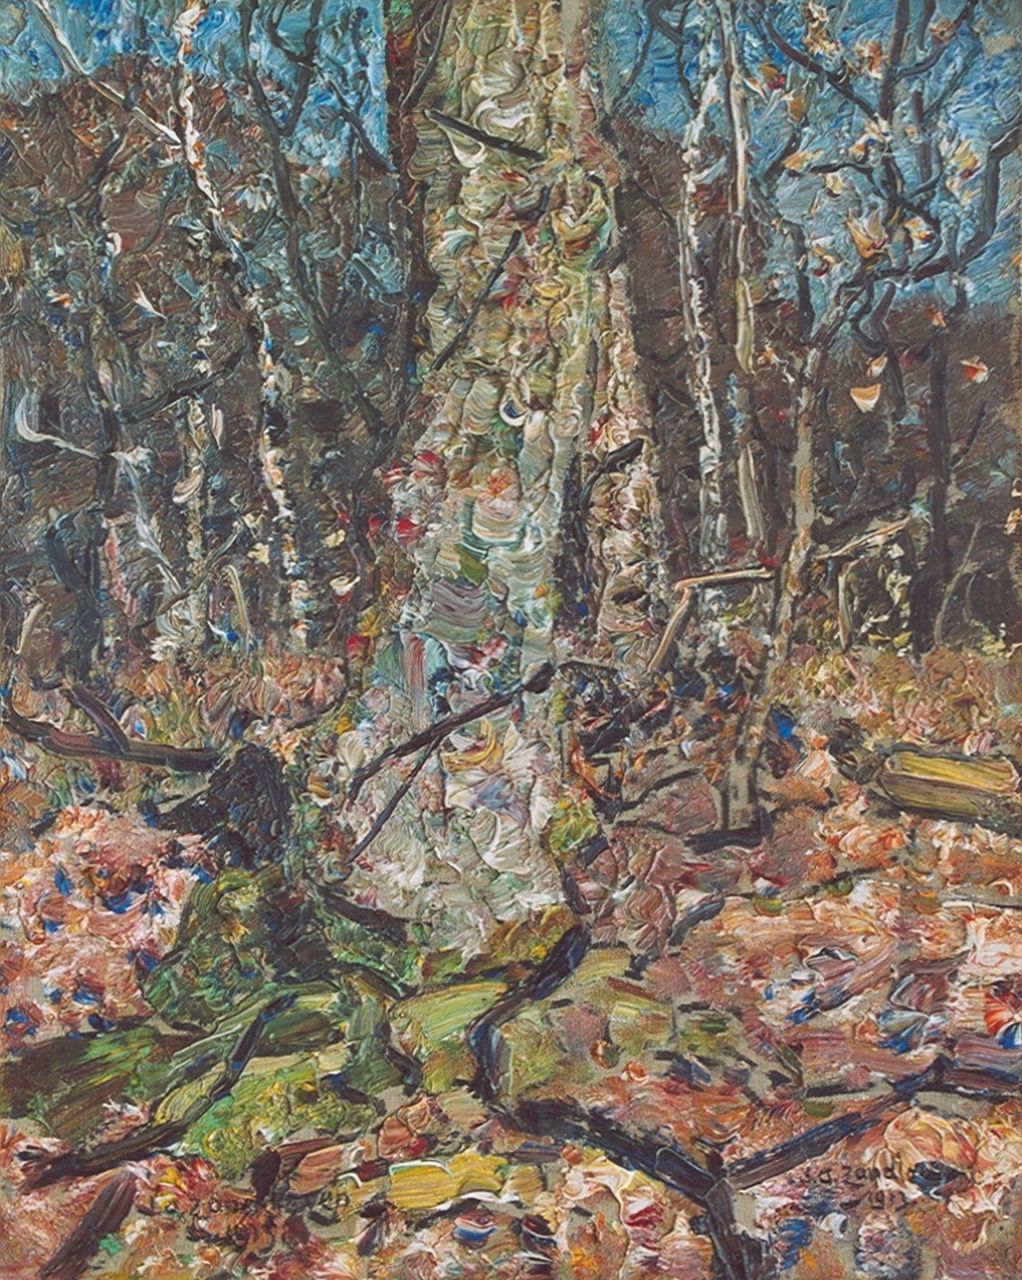 Zandleven J.A.  | Jan Adam Zandleven, Forest view, oil on canvas laid down on board 40.7 x 33.0 cm, signed l.r. and dated 1913